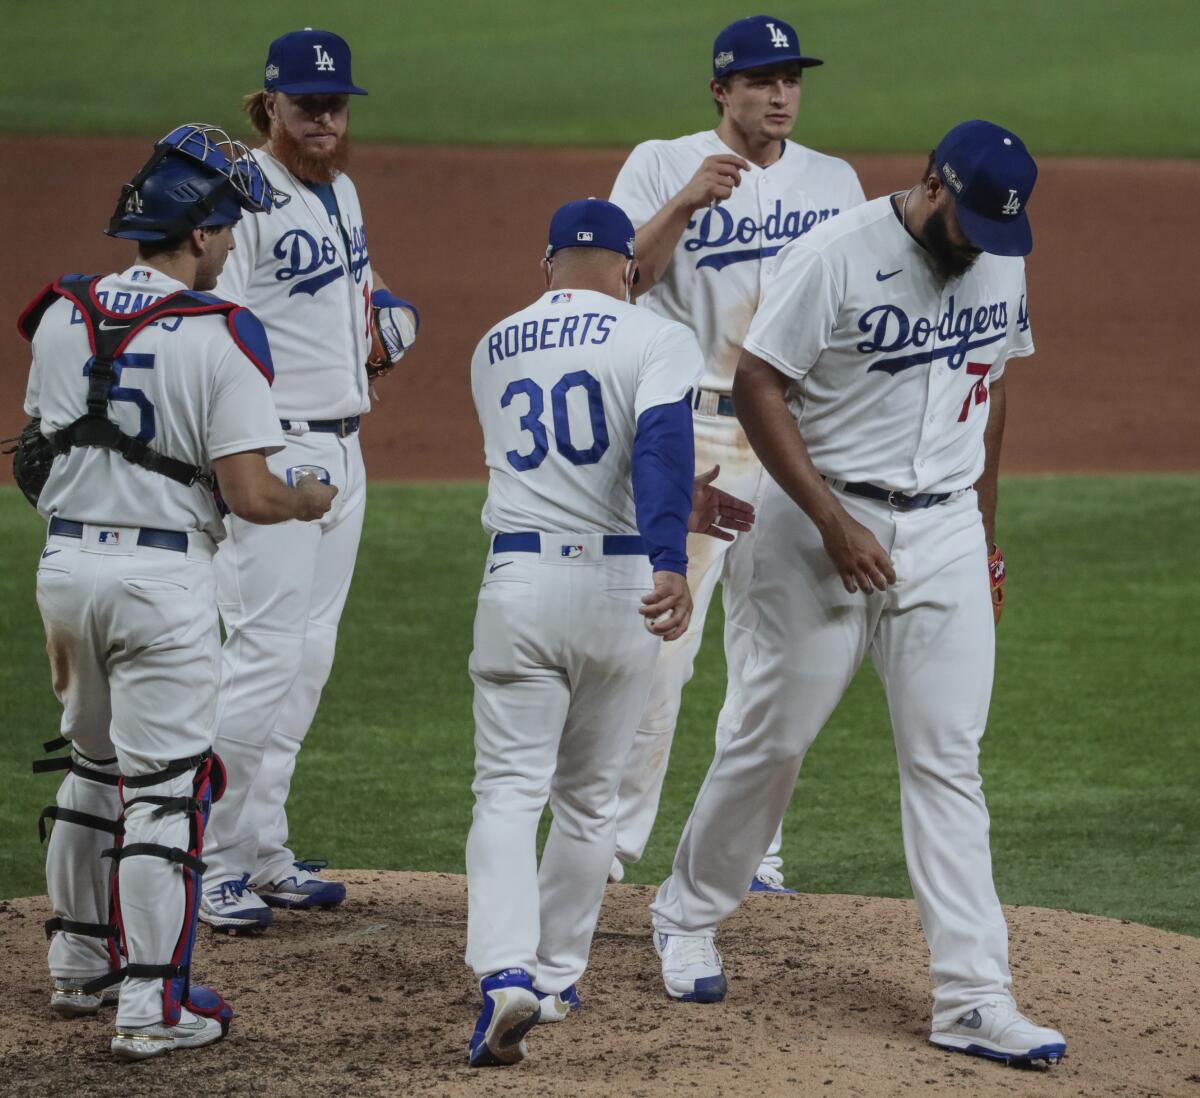 Los Angeles Dodgers relief pitcher Kenley Jansen (74) is pulled from the game 